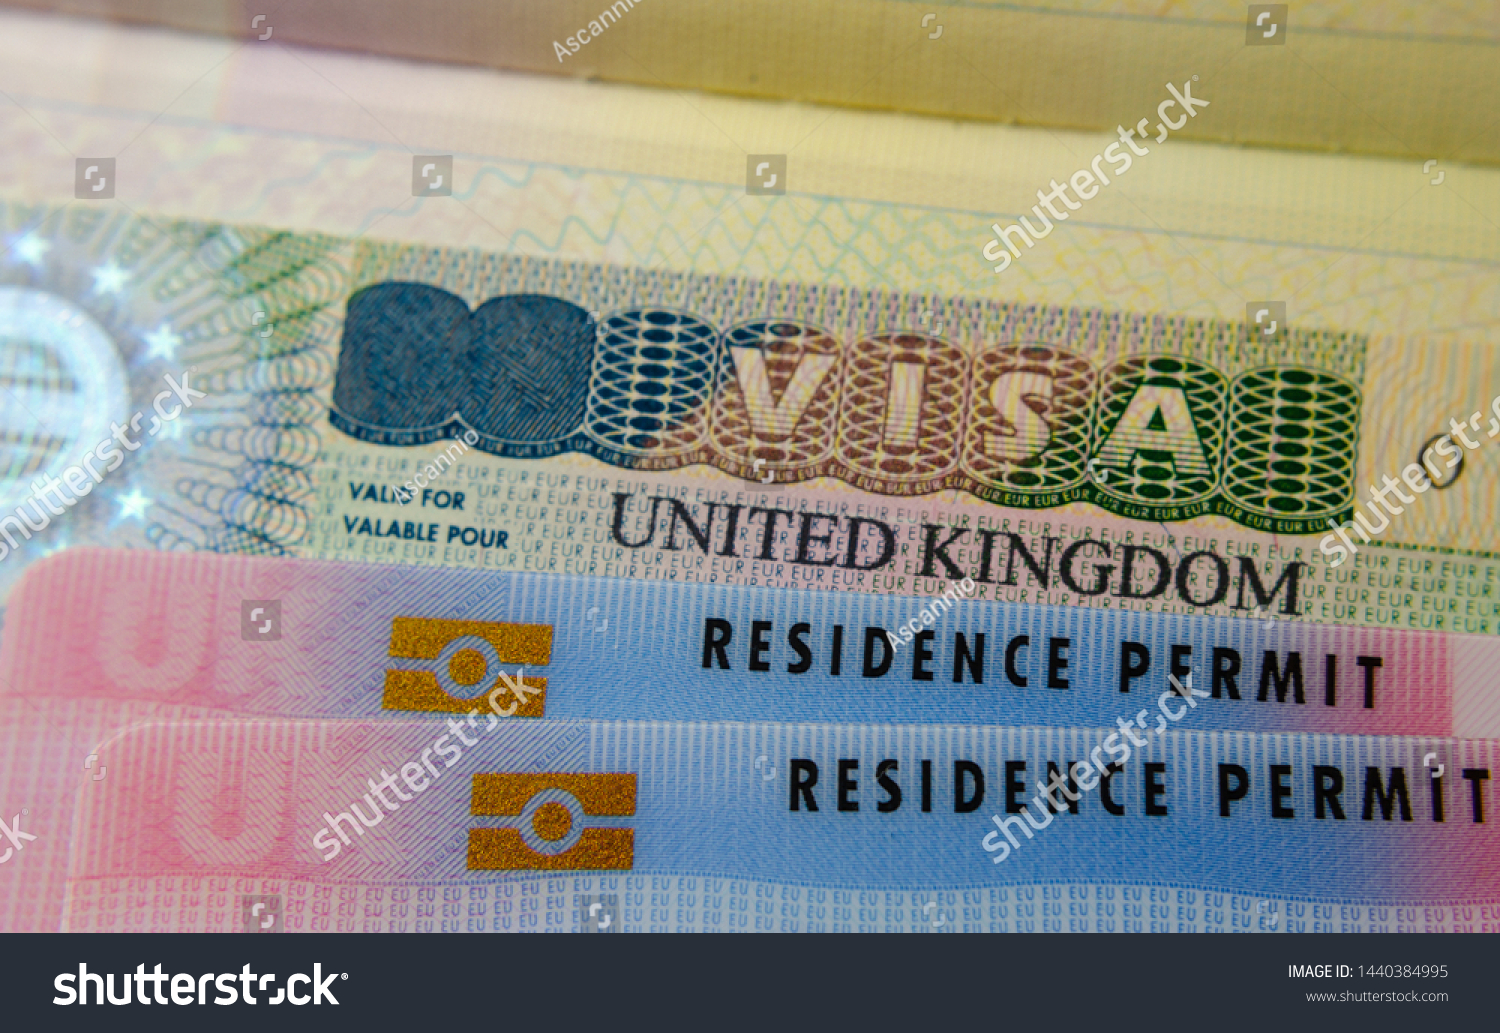 United Kingdom BRP (Biometrical Residence Permit) cards for Tier 2 work visa placed on top of UK VISA sticker in the passport. Close up photo.  #1440384995